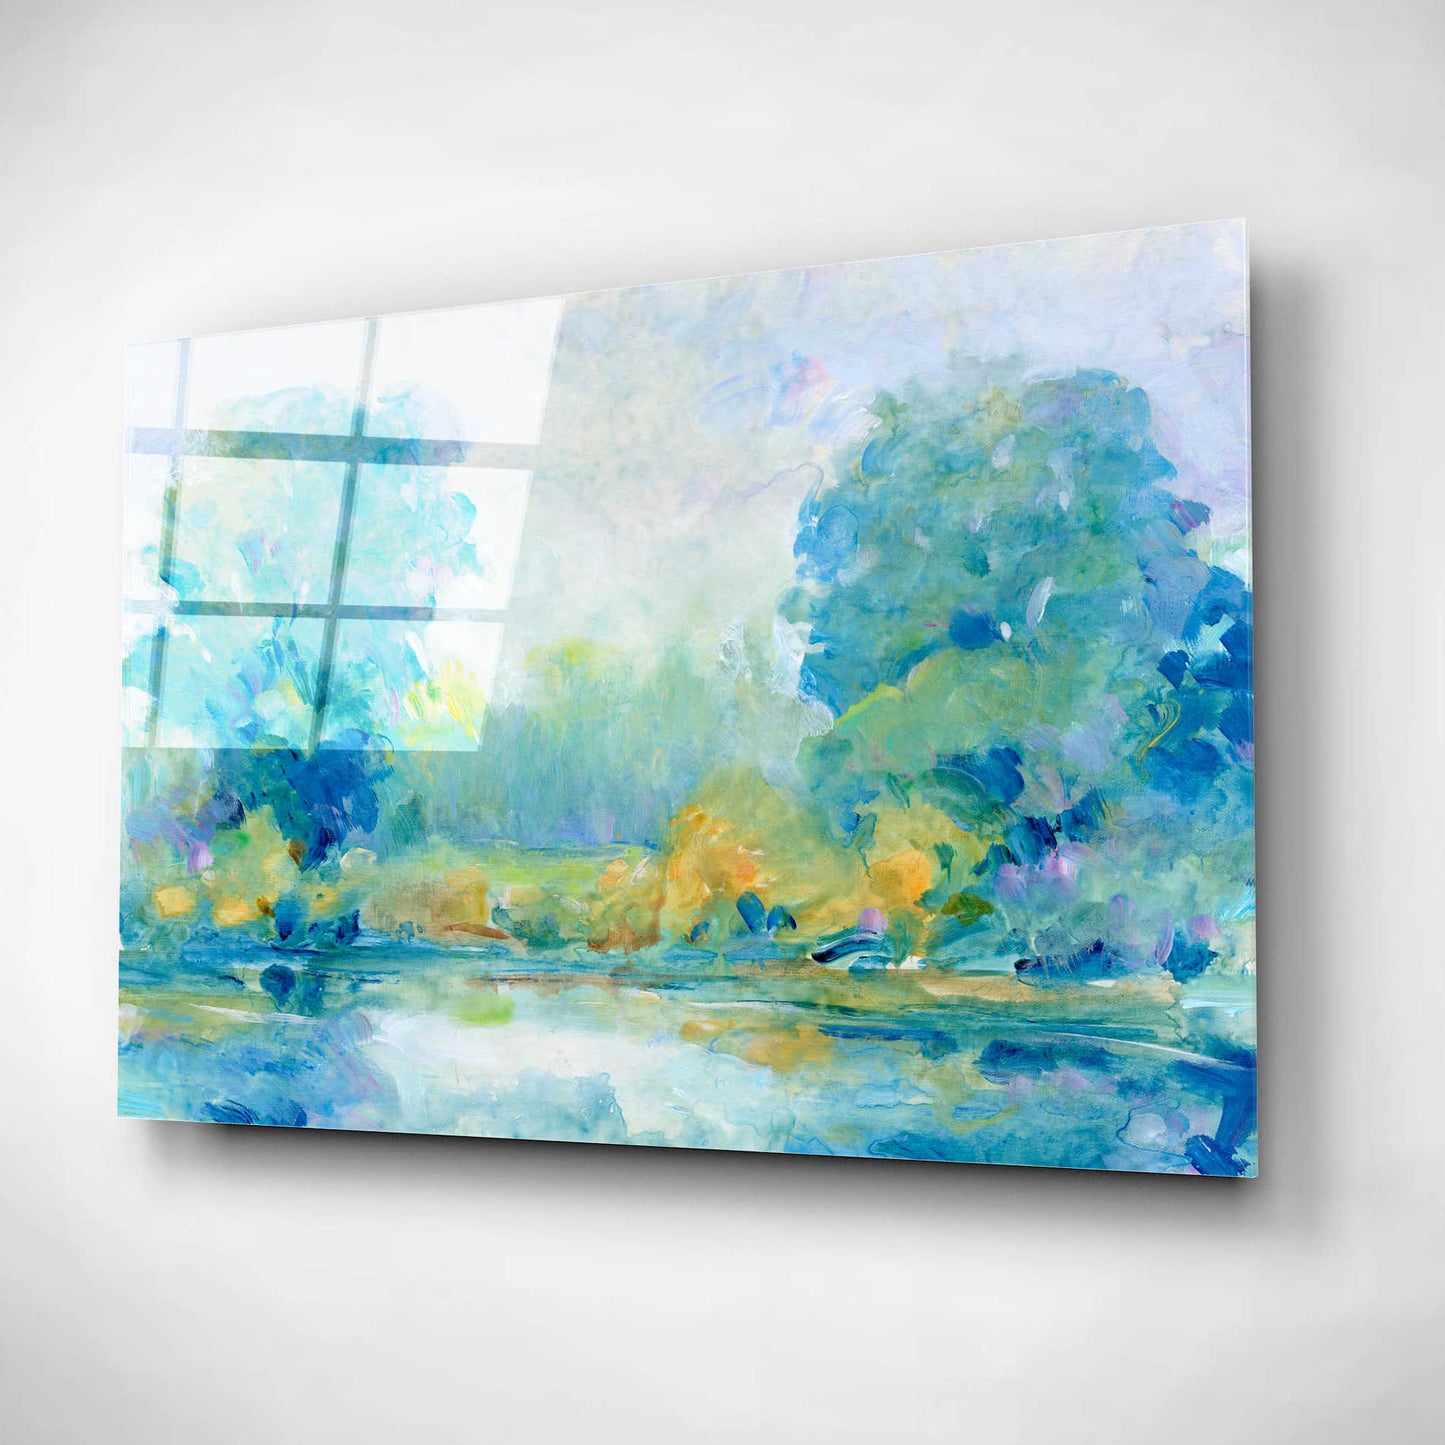 Epic Art 'Quiet Morning I' by Tim O'Toole, Acrylic Glass Wall Art,16x12